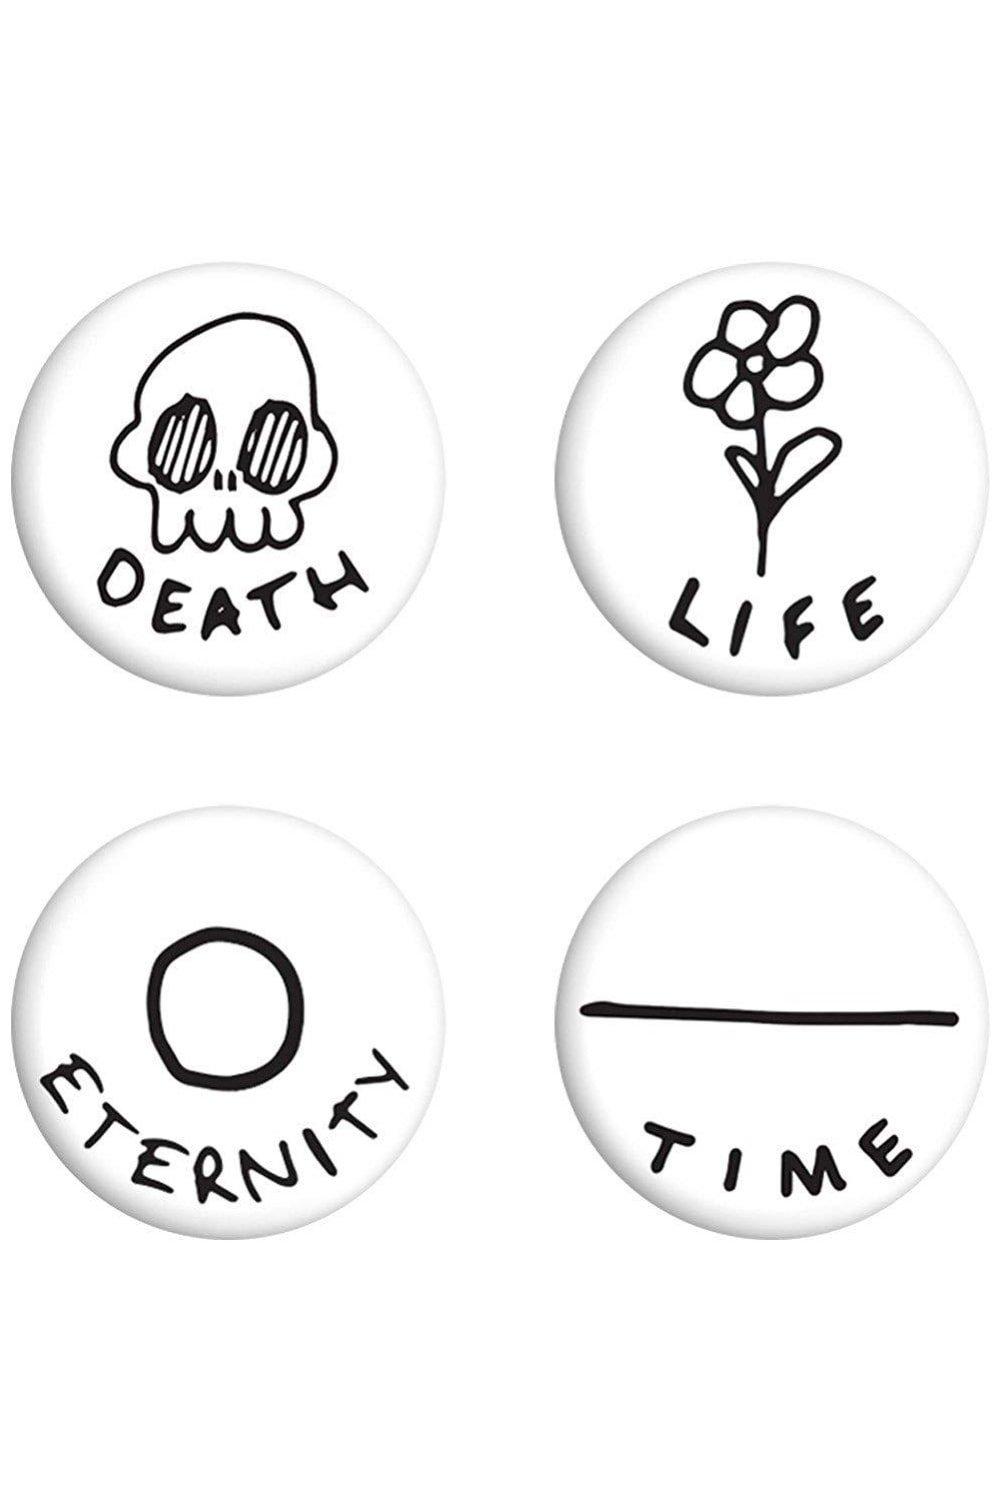 Death Life Eternity Time Badge Pack